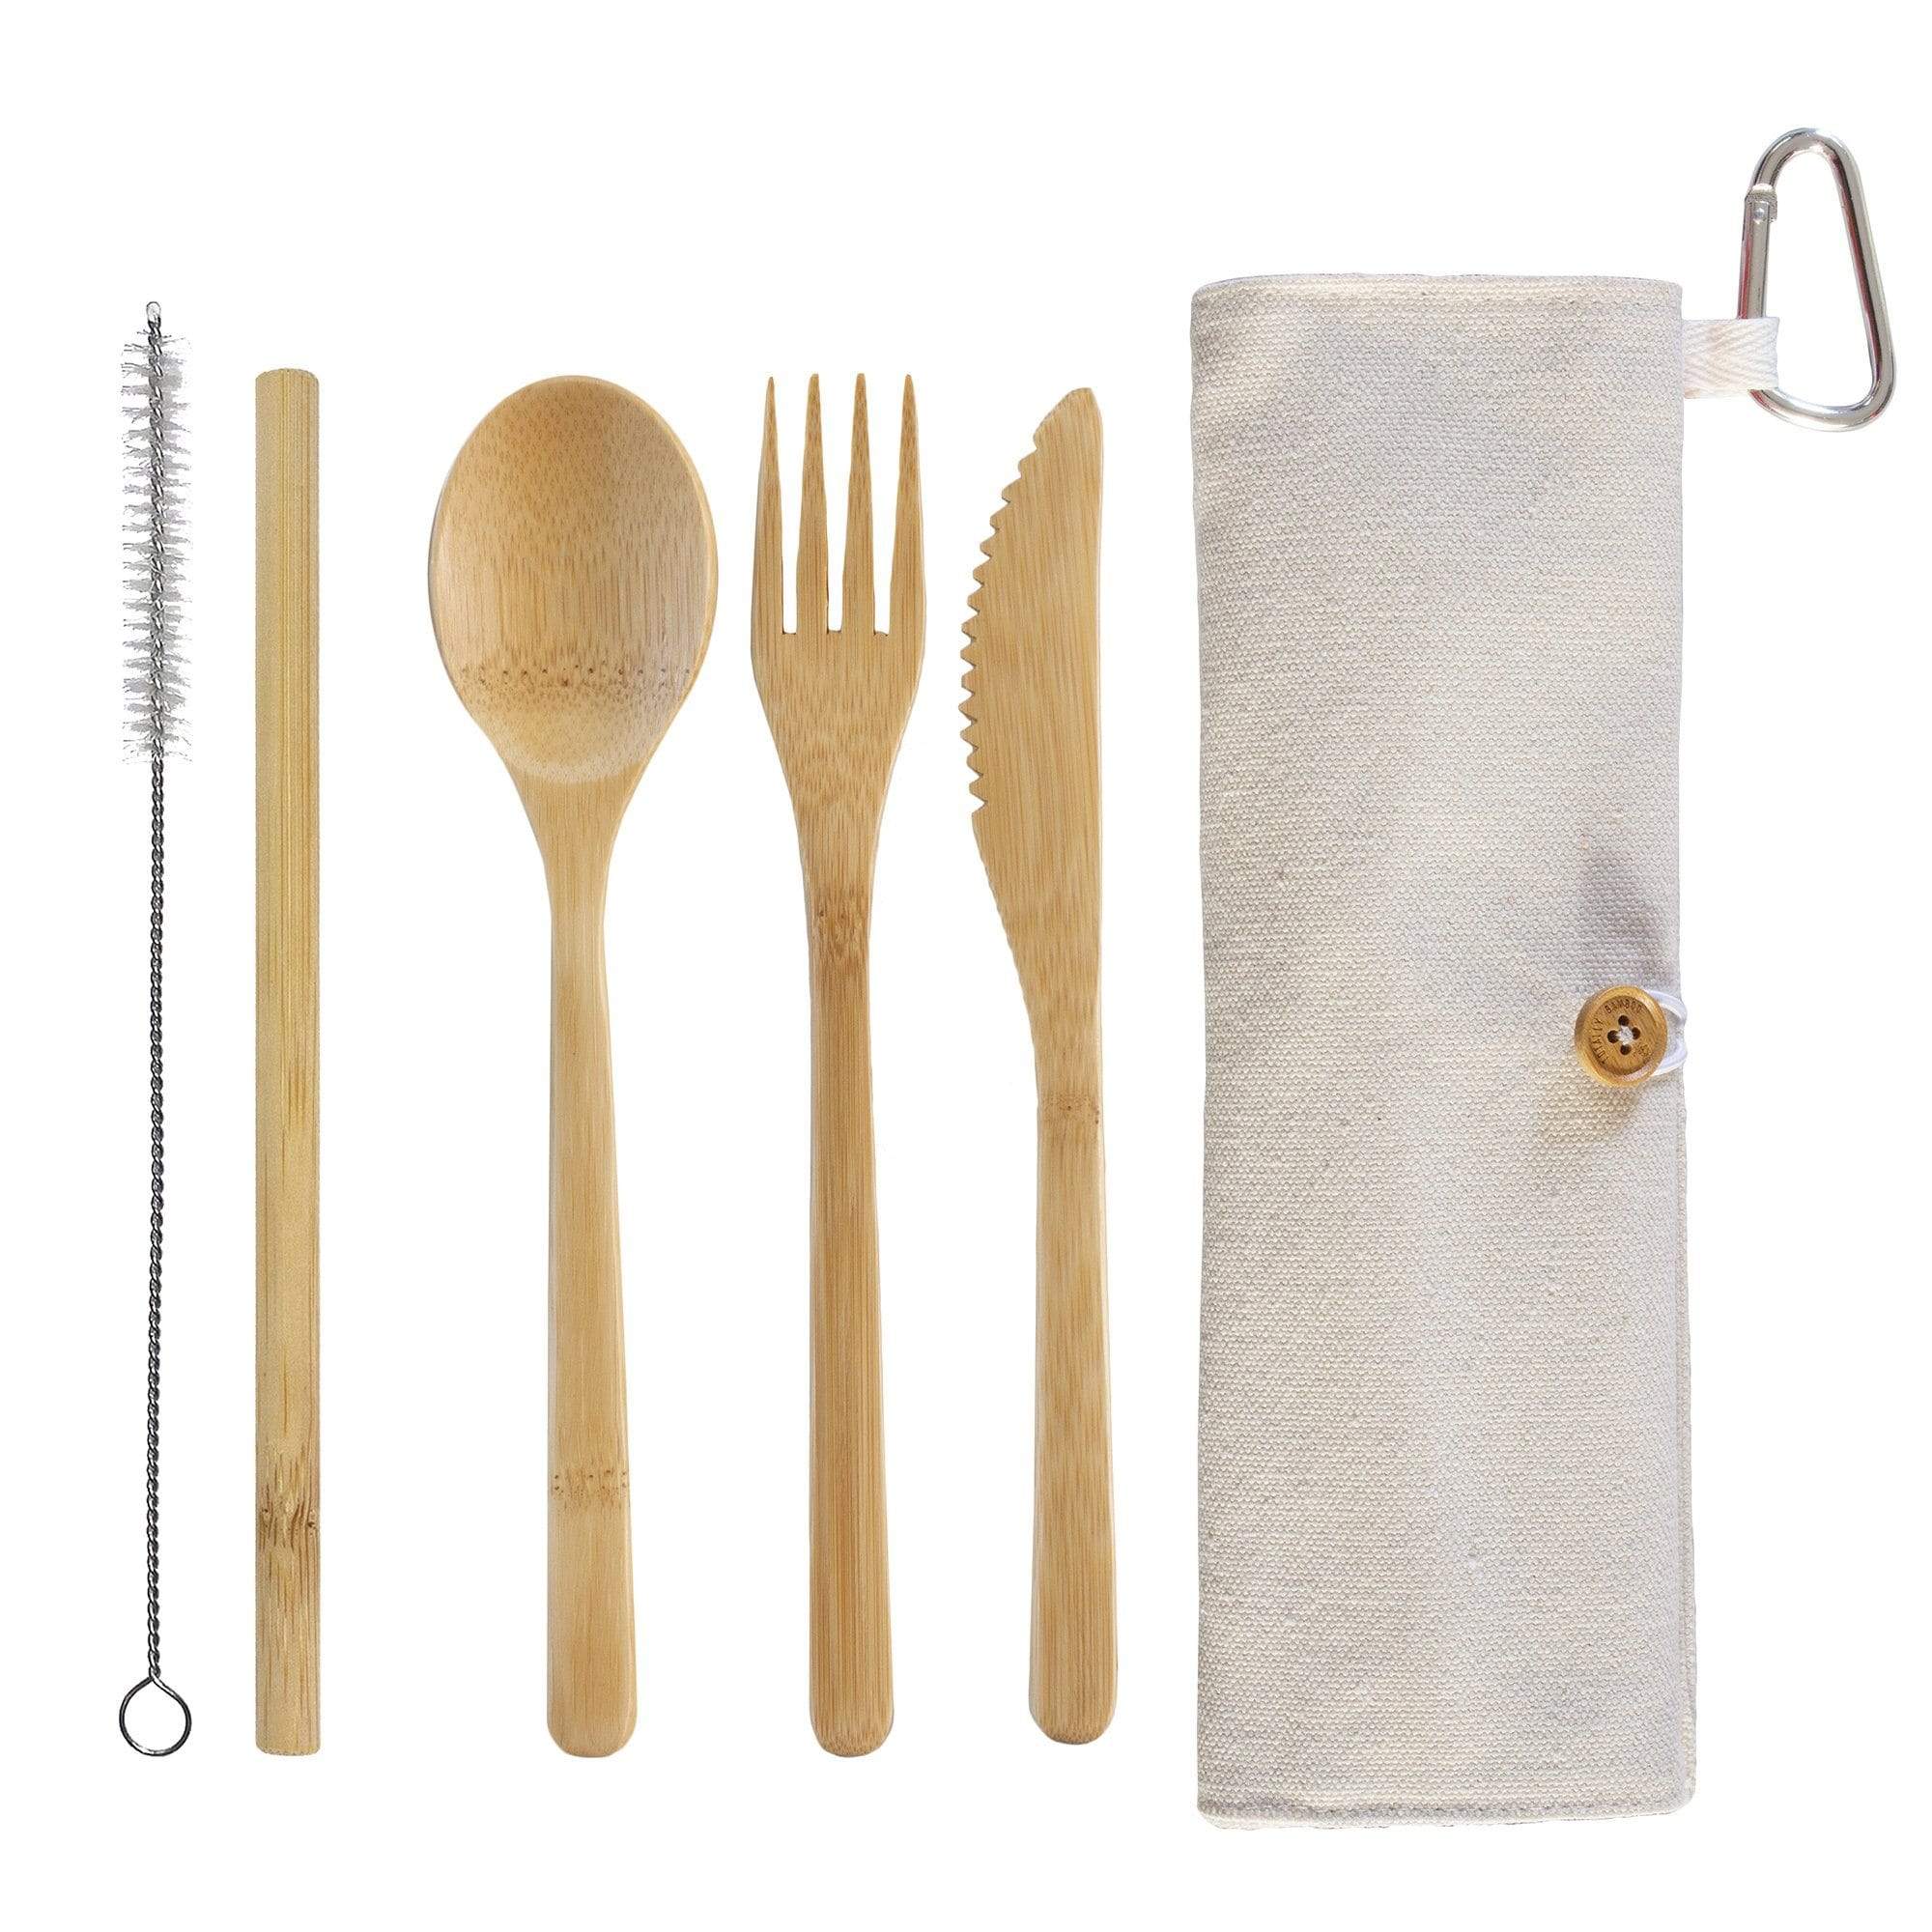 https://totallybamboo.com/cdn/shop/products/totally-bamboo-take-along-reusable-utensil-set-with-travel-case-includes-bamboo-spoon-fork-knife-and-drinking-straw-dishwasher-safe-totally-bamboo-576272.jpg?v=1628001261